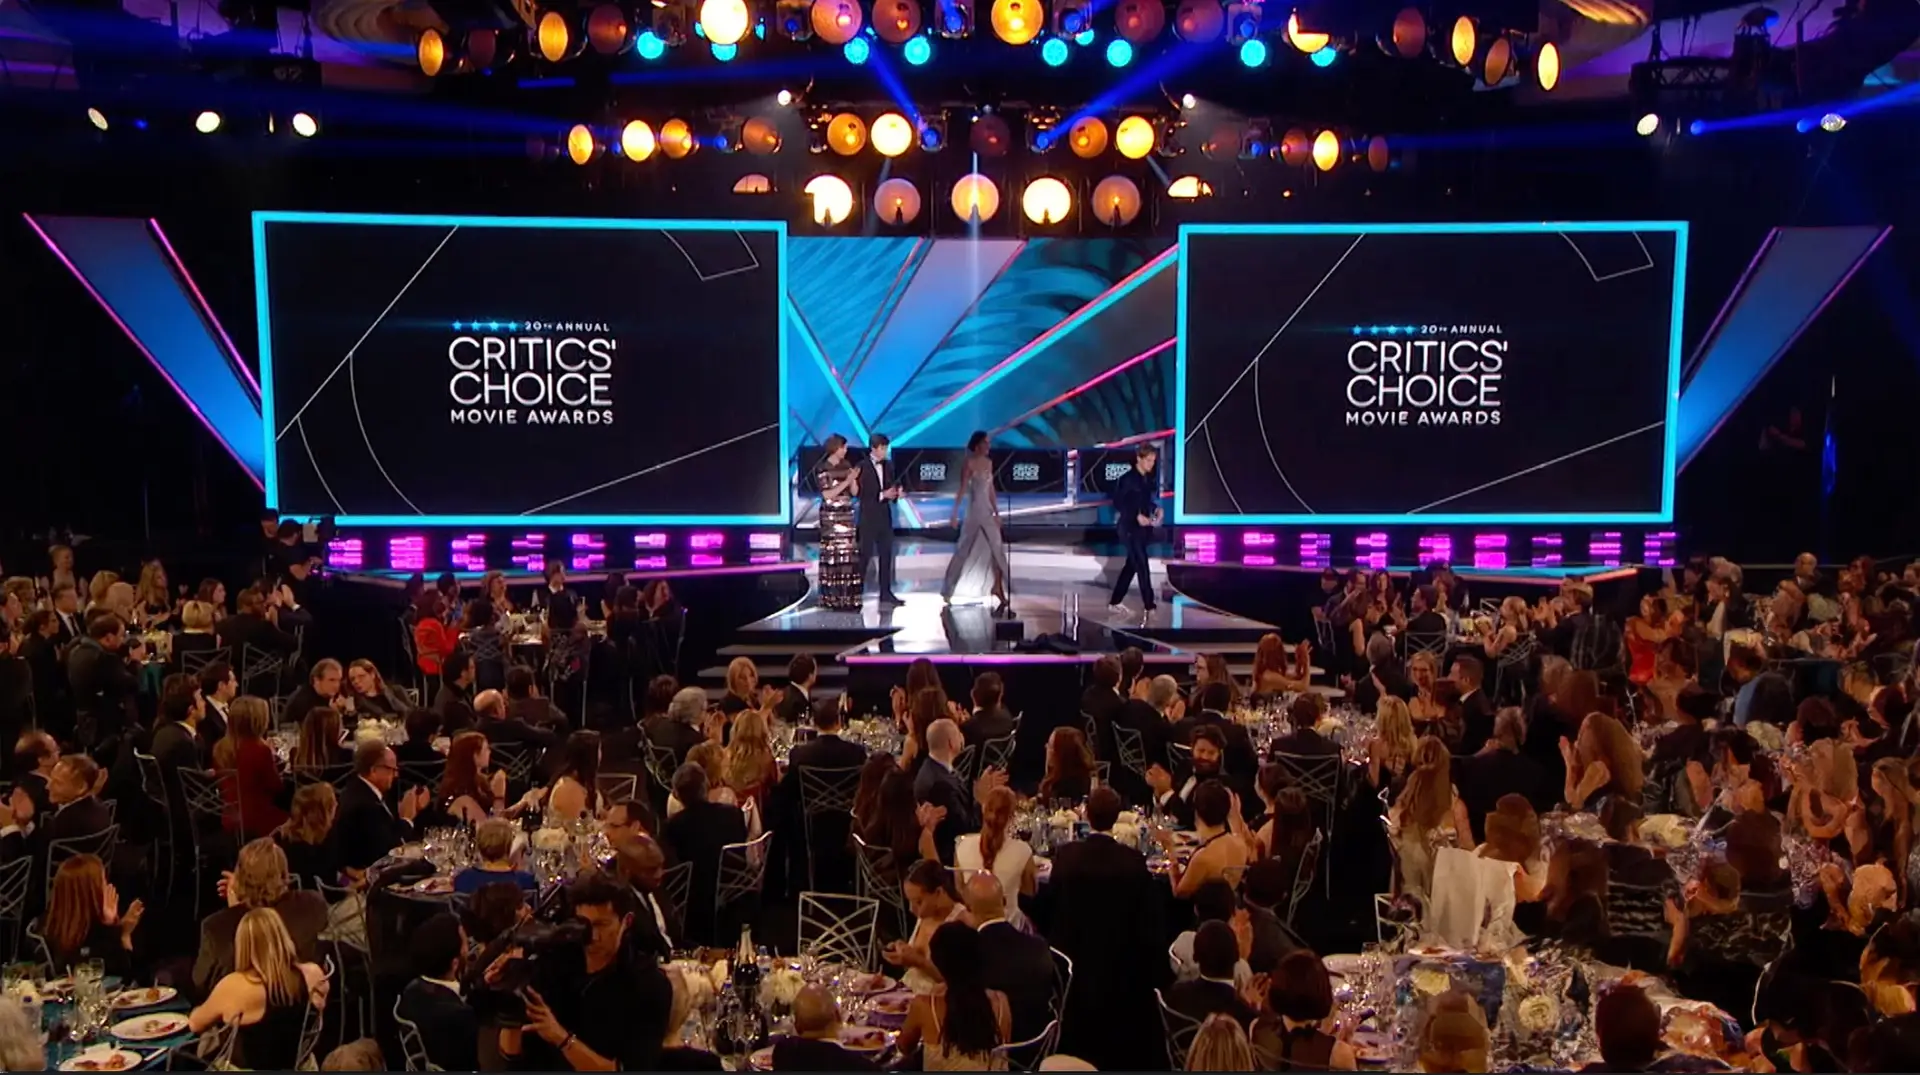 The people's choice awards are held in a large auditorium designed for A&E events.